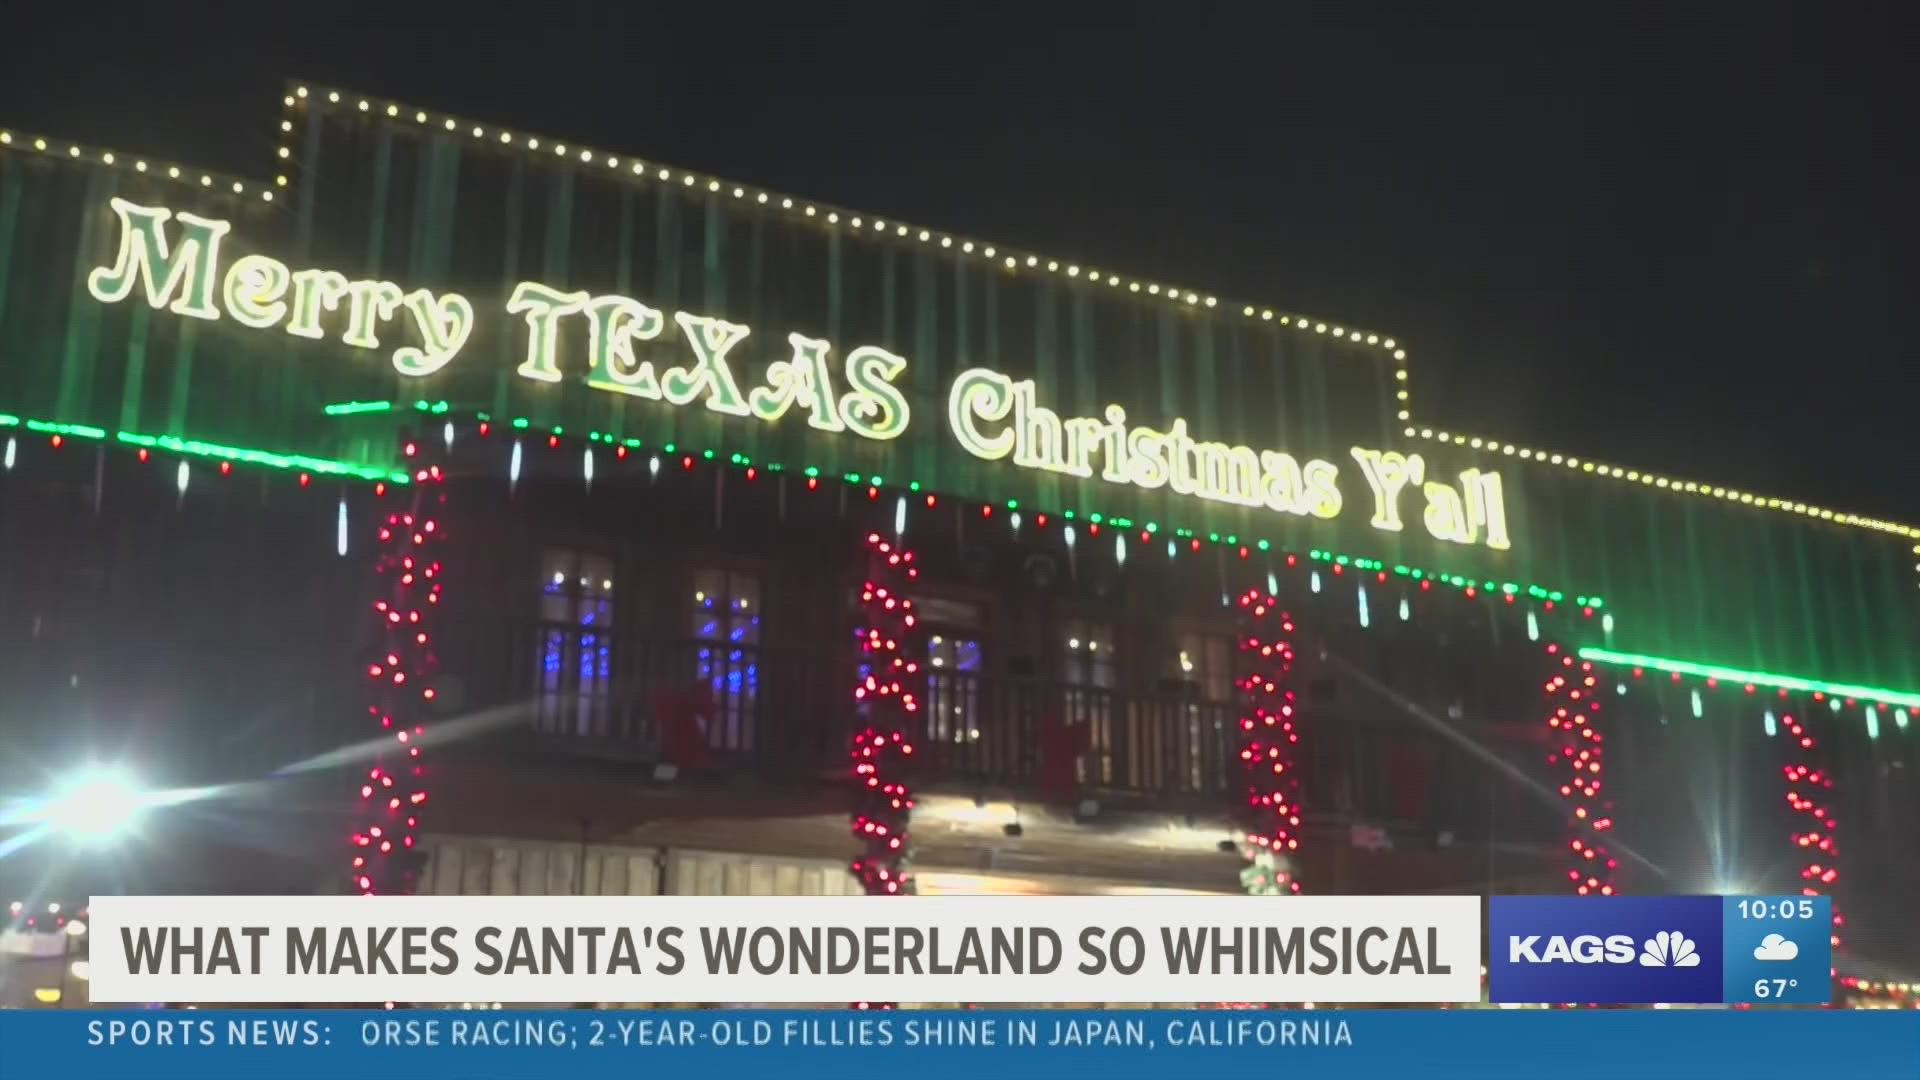 Residents shared their first time experience visiting and what the wonderland had to offer this year, including new attractions, photo opportunities, and food.